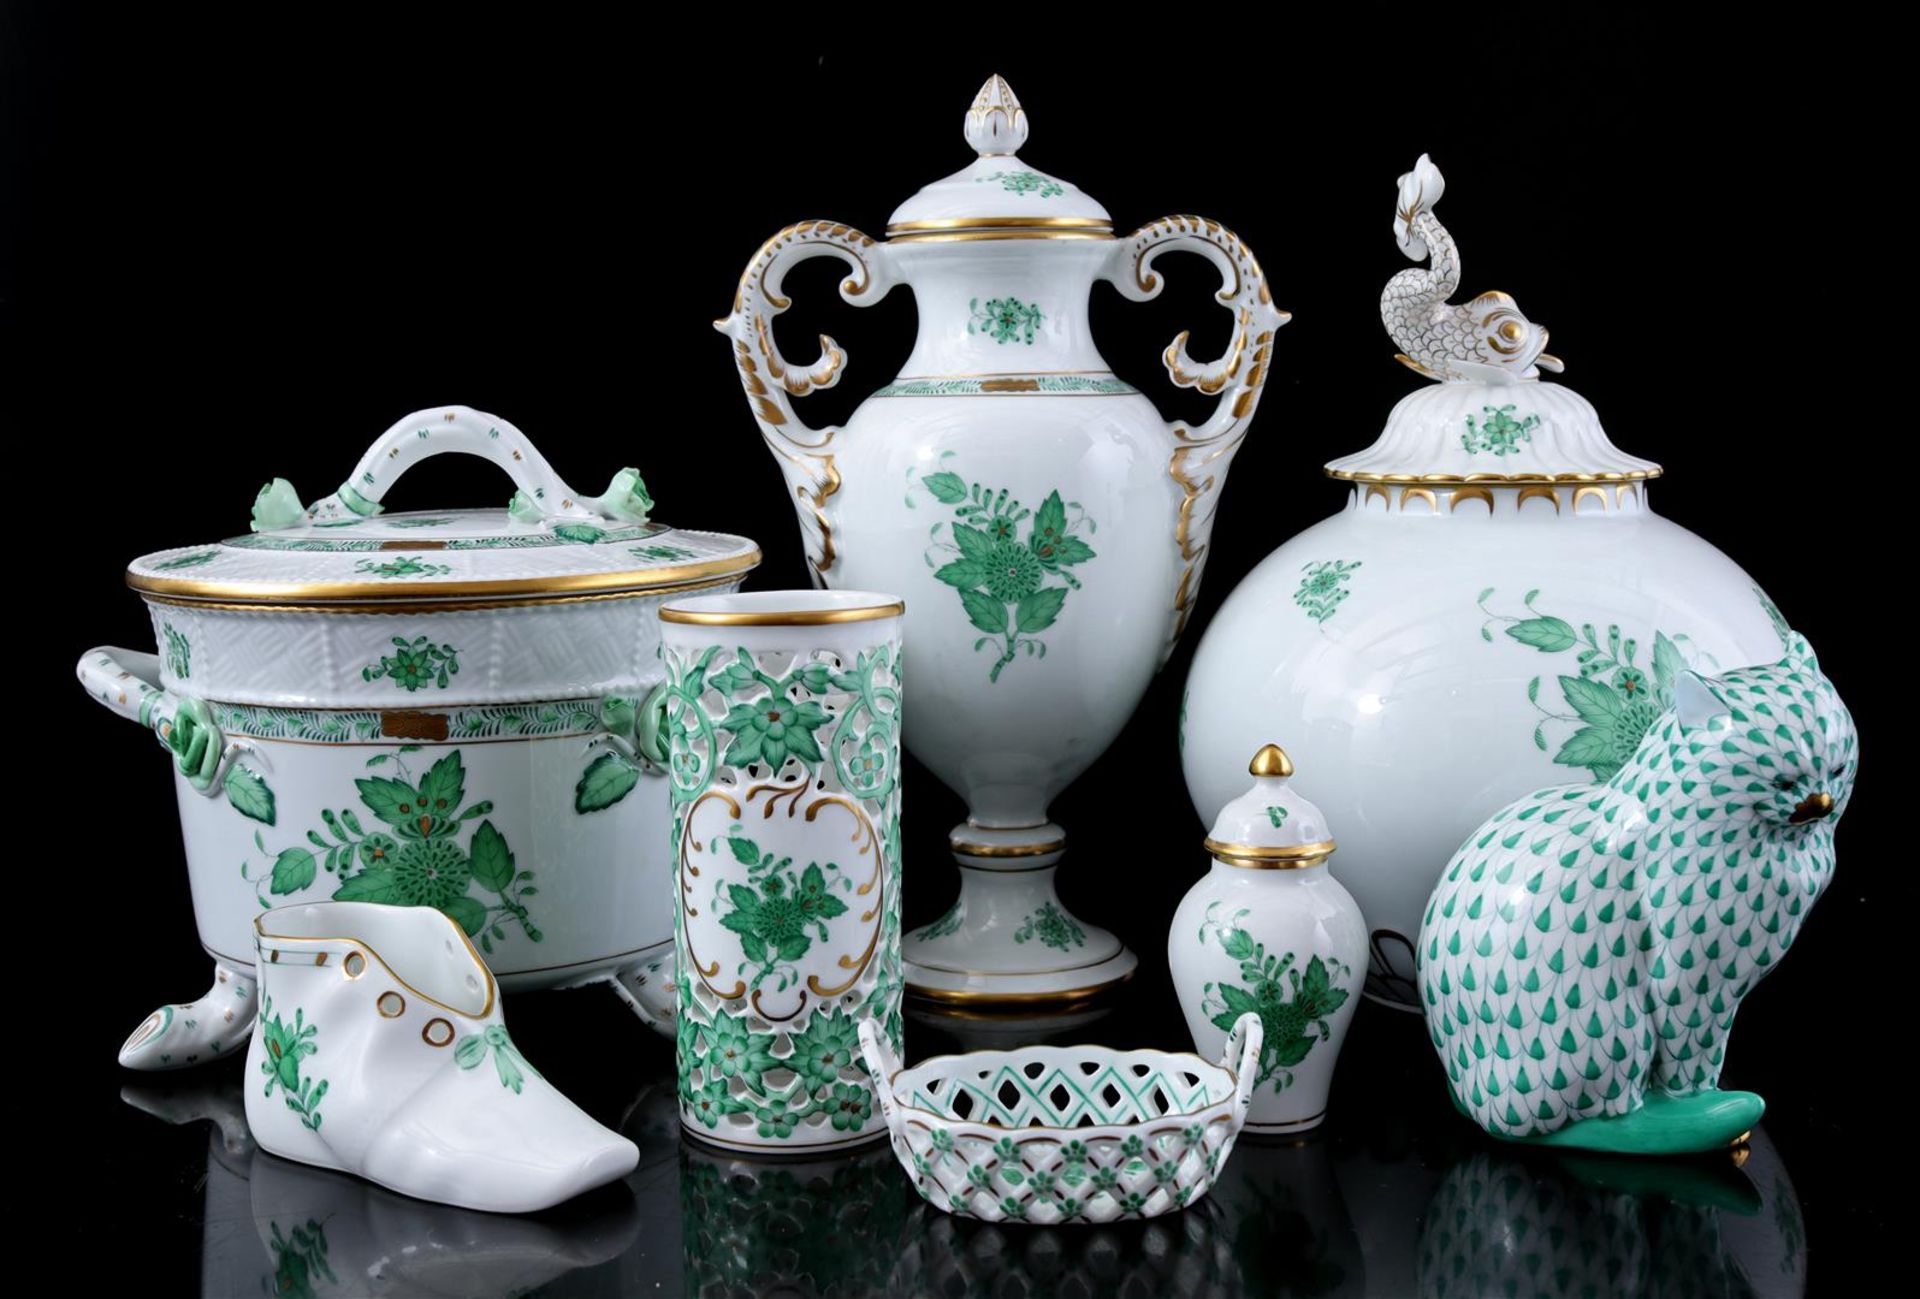 8 Herend porcelain objects